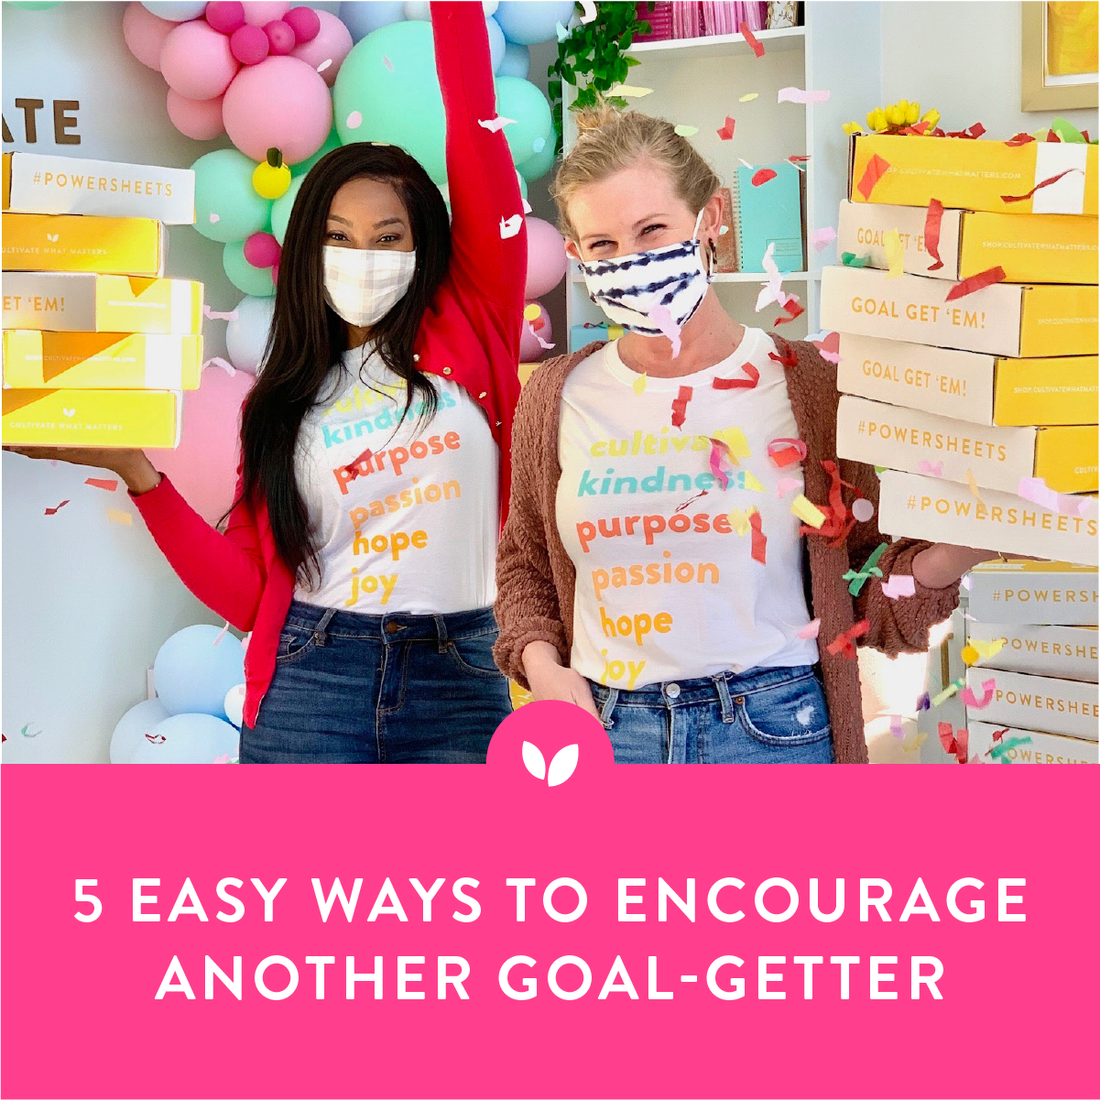 5 Easy Ways to Encourage Another Goal-Getter